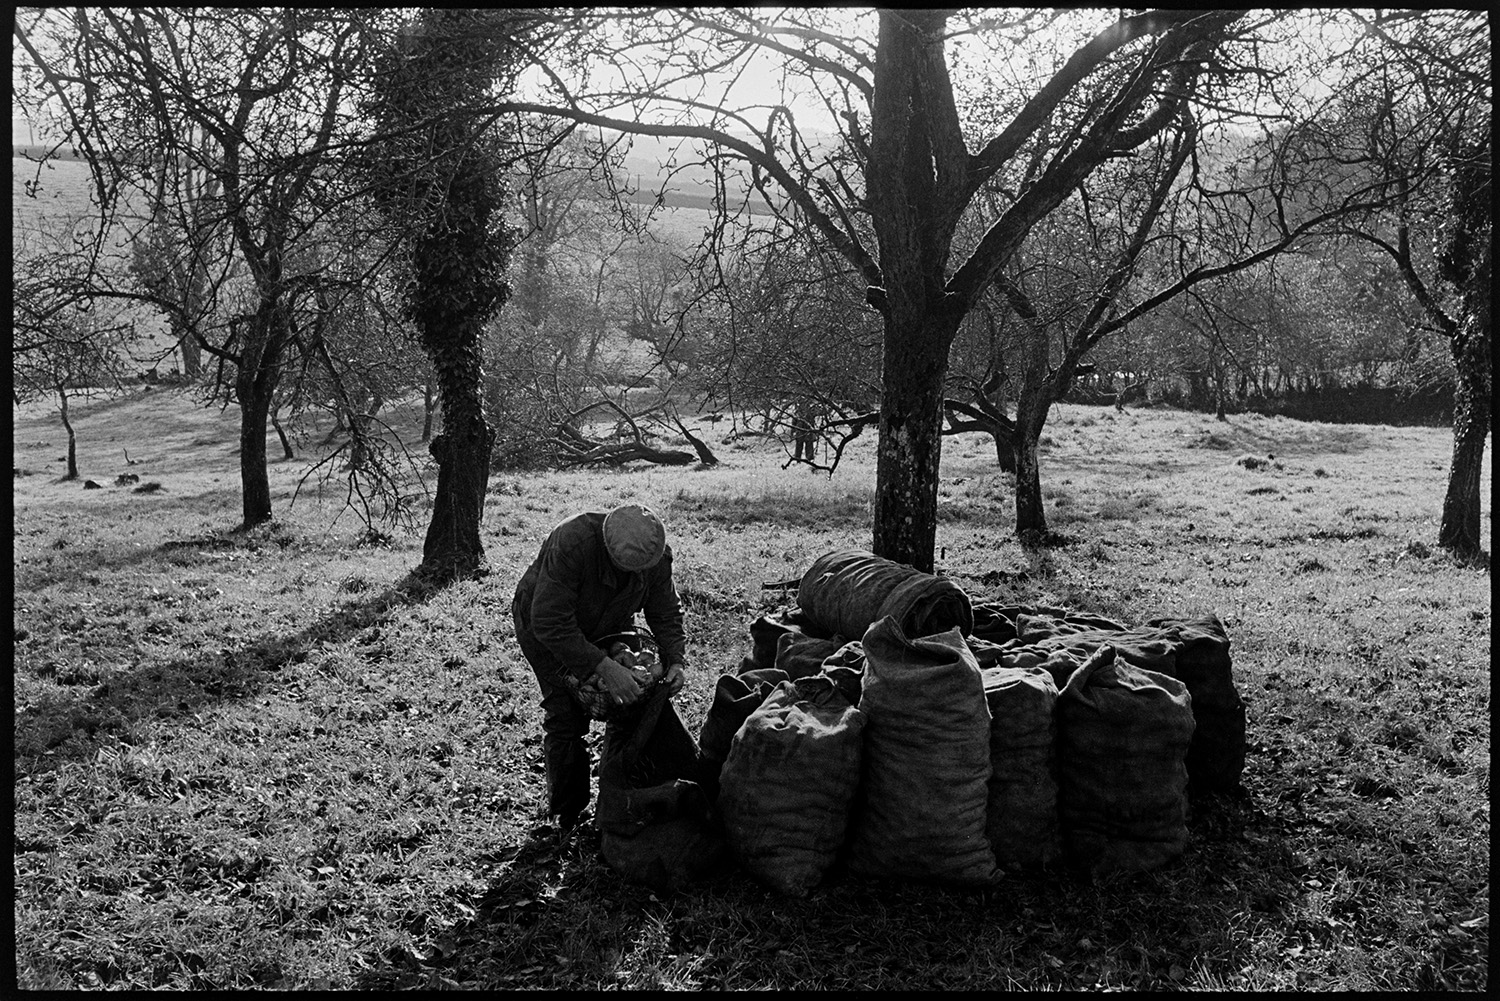 Cider orchard, men picking up apples and bagging them up. Fallen apple tree.
[Bill Lott putting apples into a bag in a cider orchard at Westpark, Iddesleigh. Full sacks of apples are stacked around a tree.]